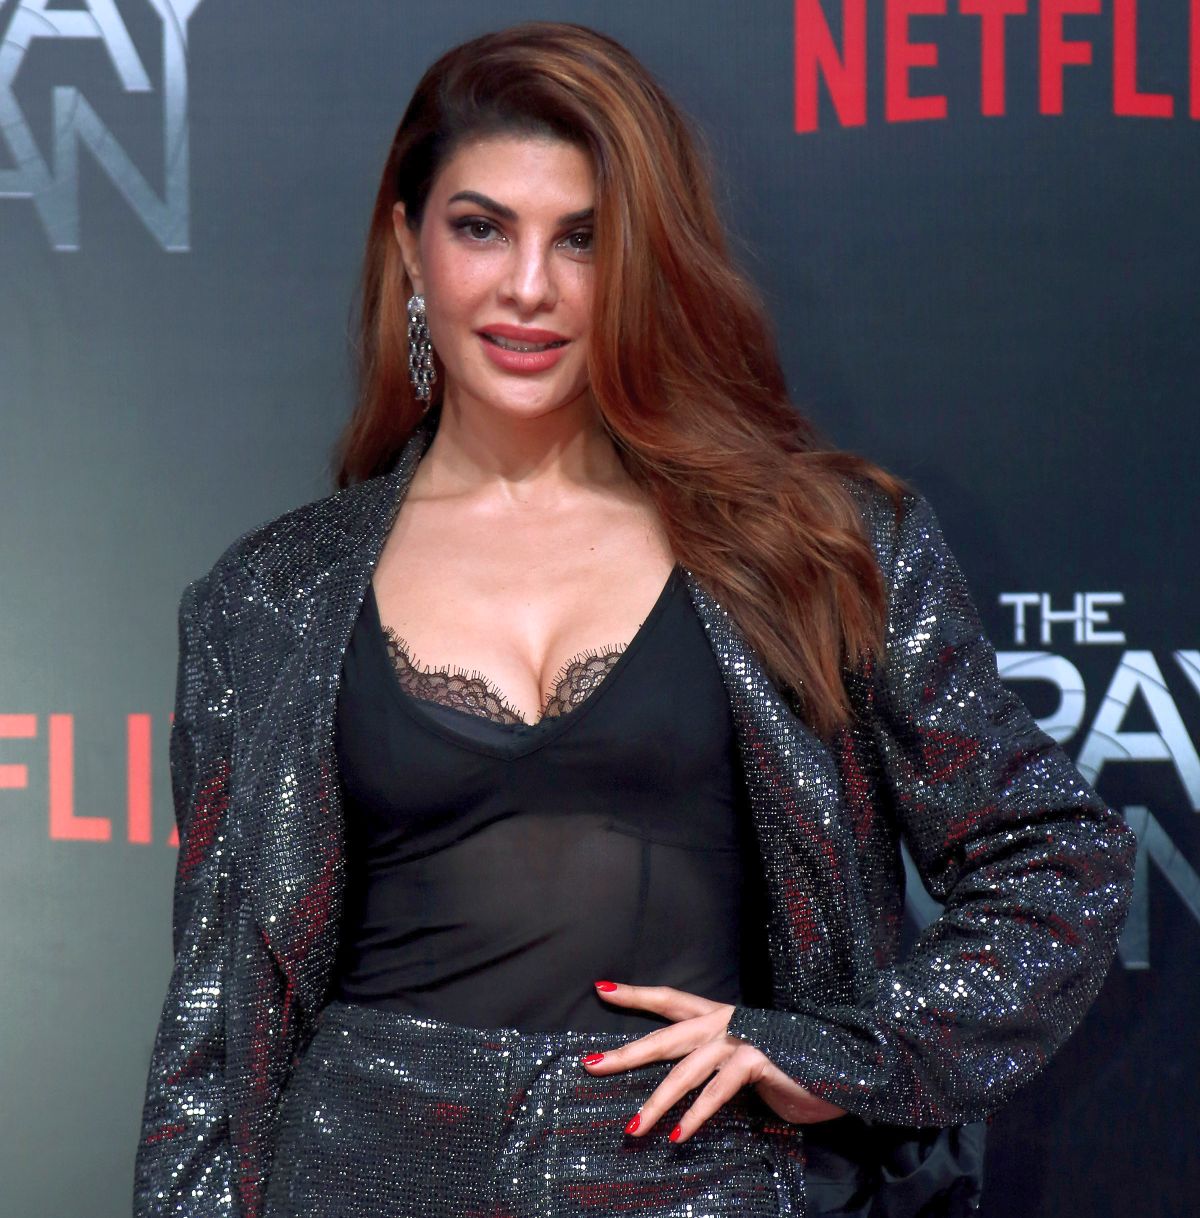 ED names Jacqueline Fernandez as accused in 'conman' case - Rediff.com